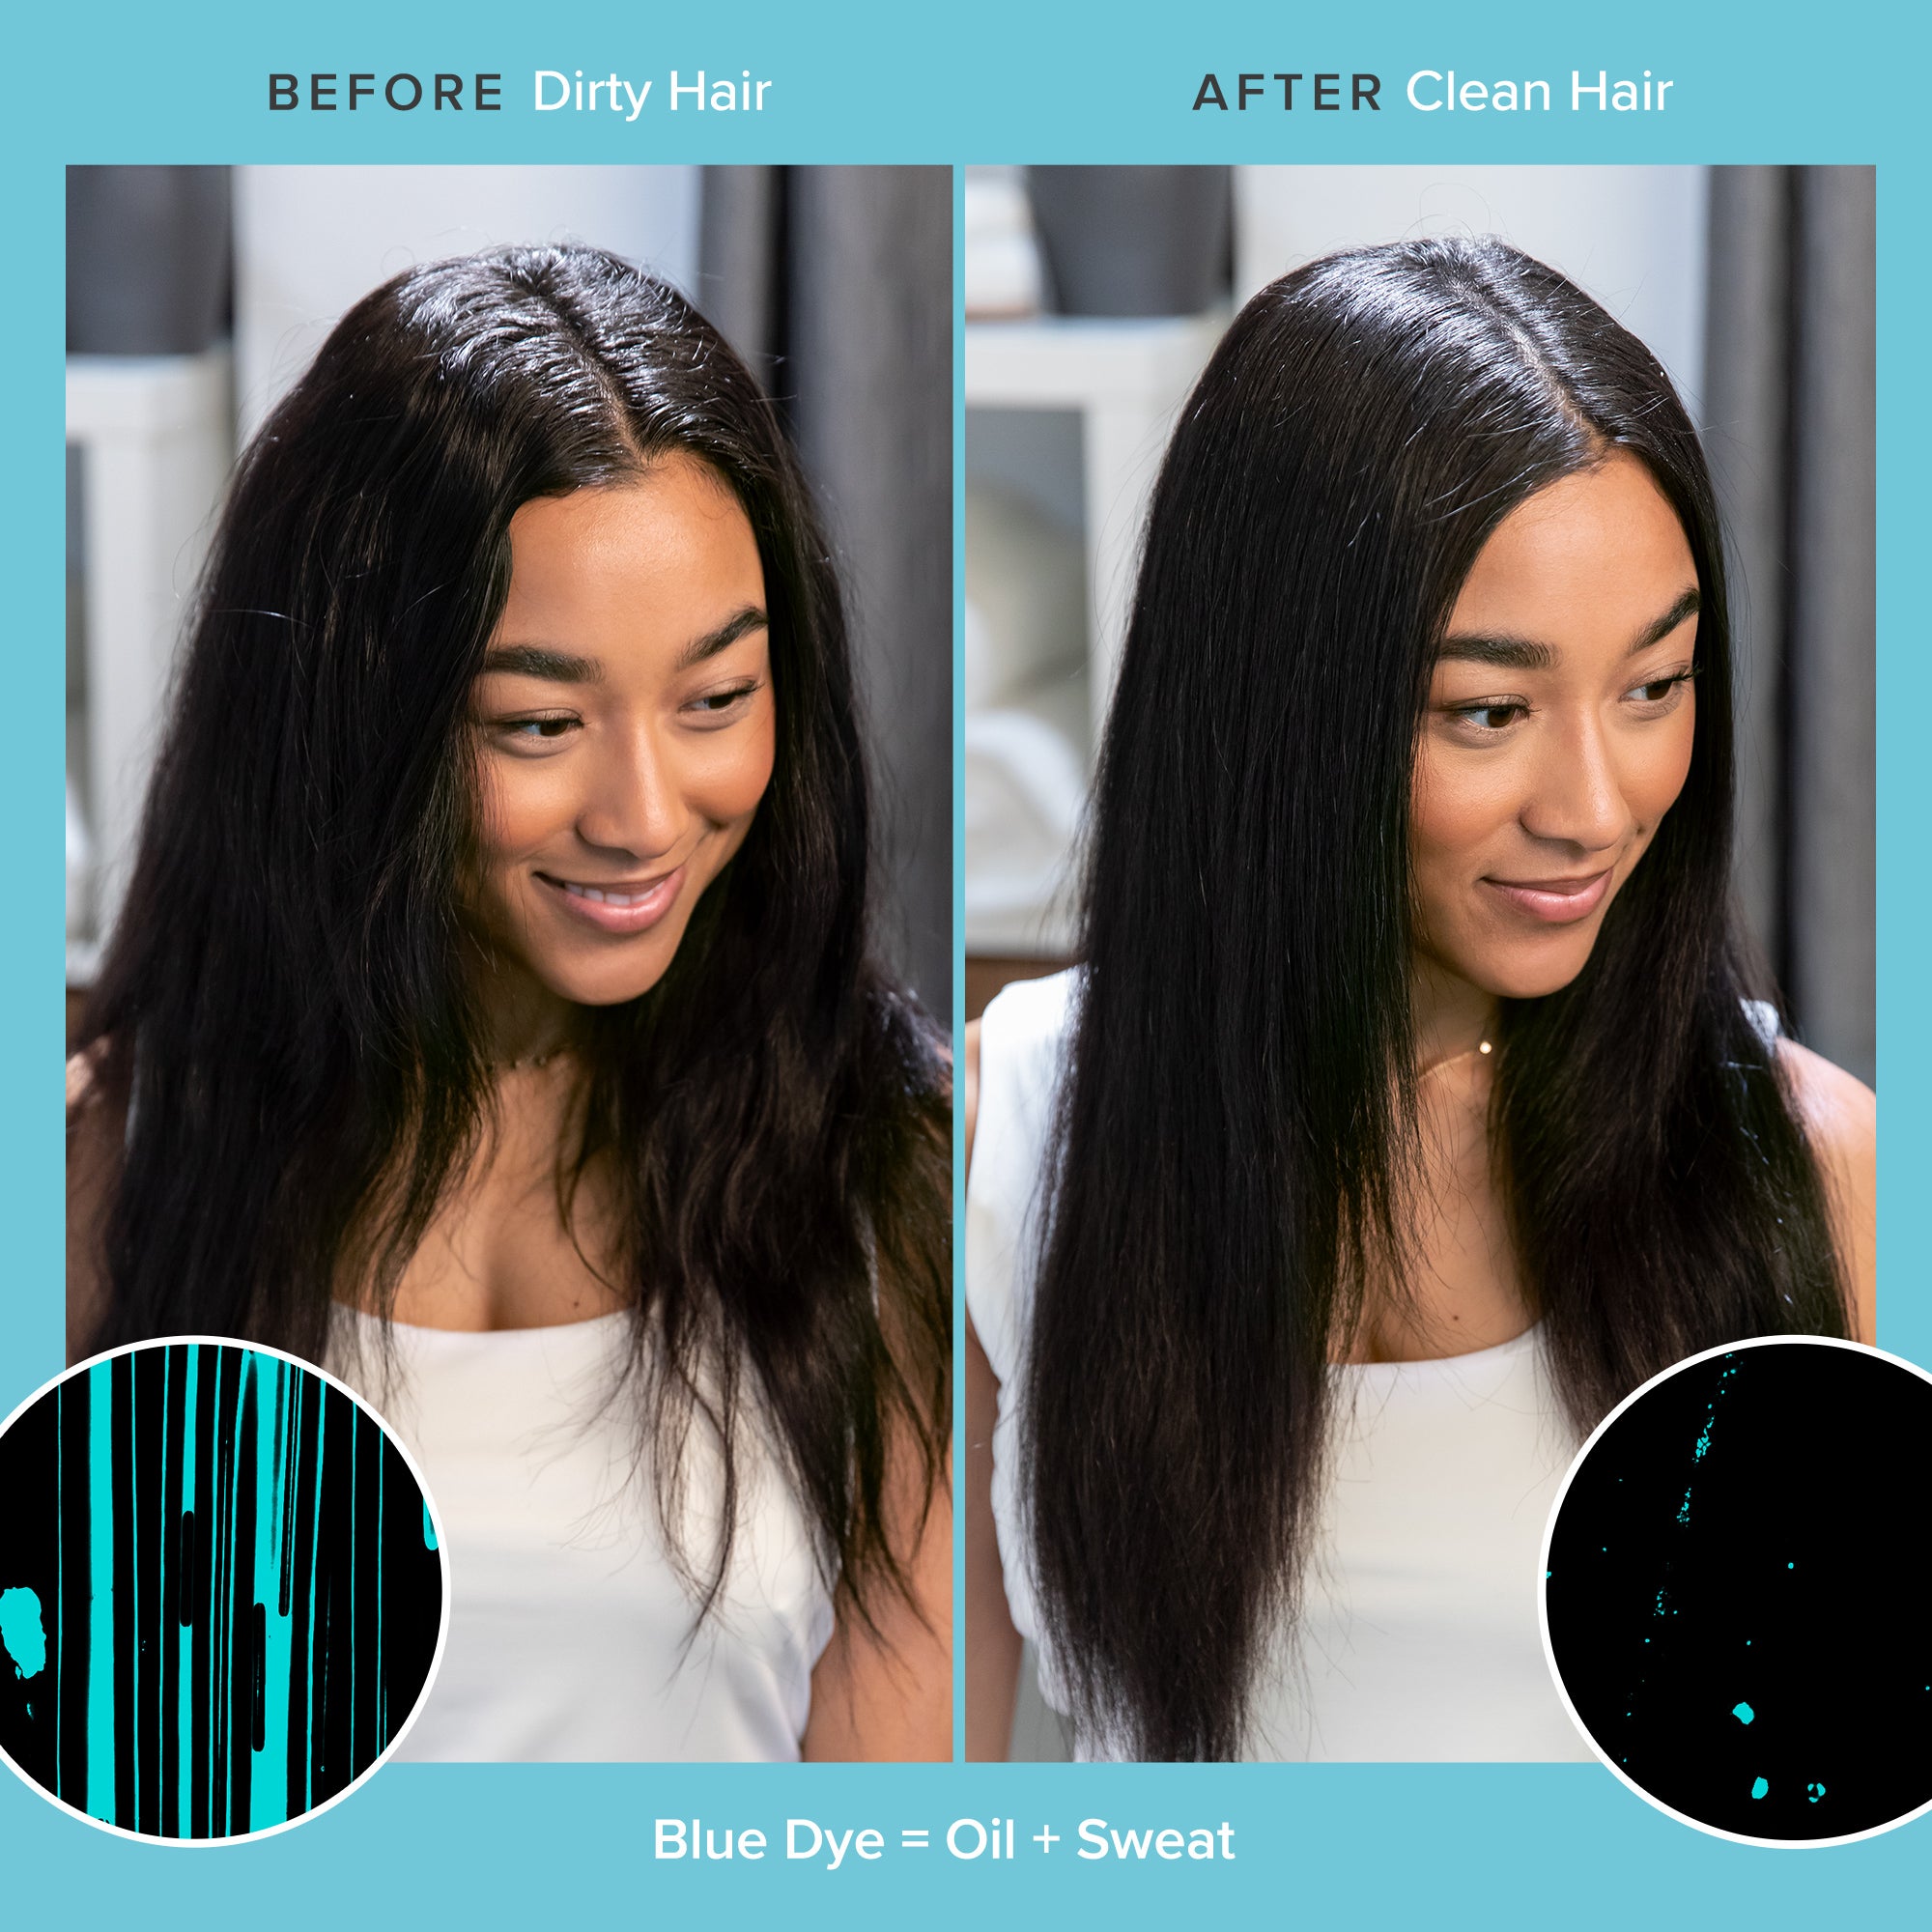 Before and after showing a model's frizzy, oily hair looks sleek and shiny after using the dry shampoo